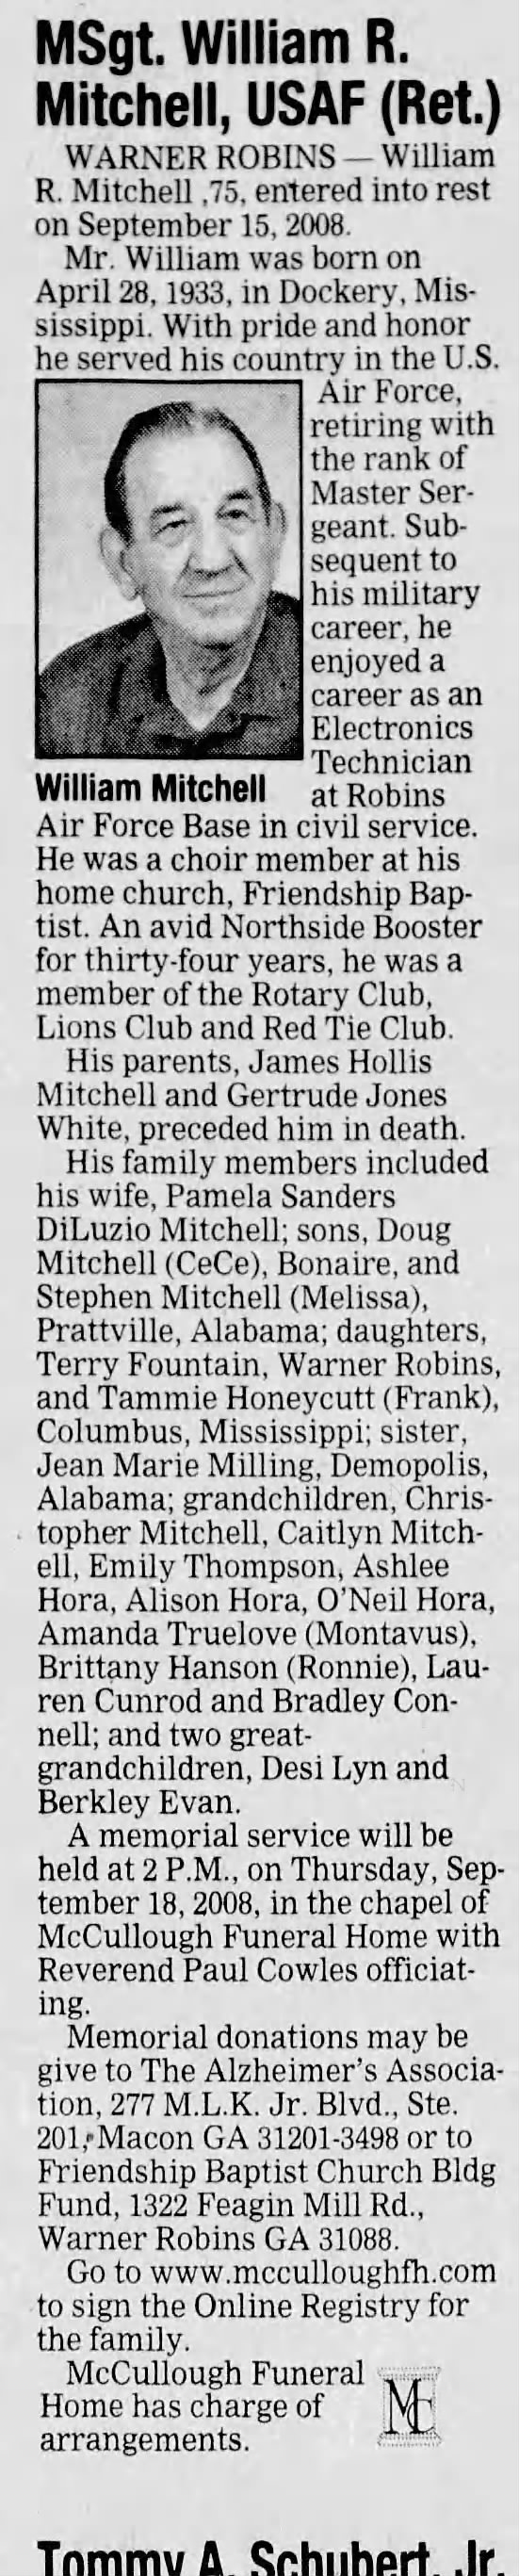 Obituary for William R Mitchell Jr